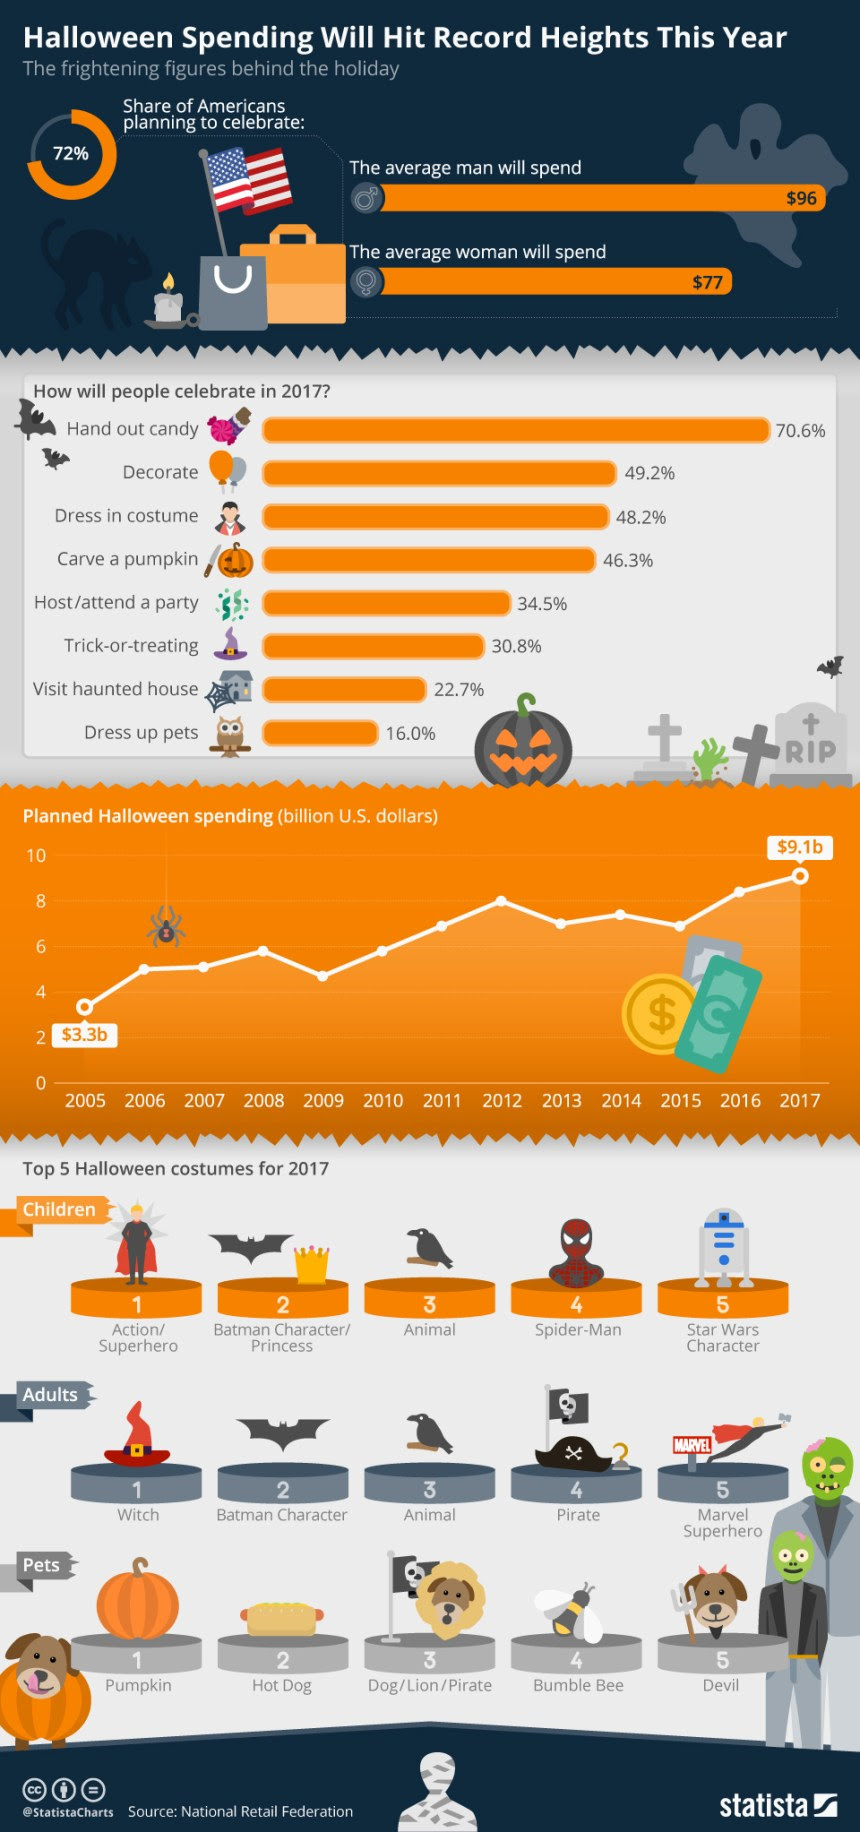 <a href="http://ift.tt/2iTSqKF; title="Infographic: Halloween Spending Will Hit Record Heights This Year | Statista"><img src="http://ift.tt/2z464yG; alt="Infographic: Halloween Spending Will Hit Record Heights This Year | Statista" width="100%" height="auto" style="width: 100%; height: auto !important; max-width:960px;-ms-interpolation-mode: bicubic;"/></a> You will find more statistics at <a href="http://ift.tt/2iOLHl1;